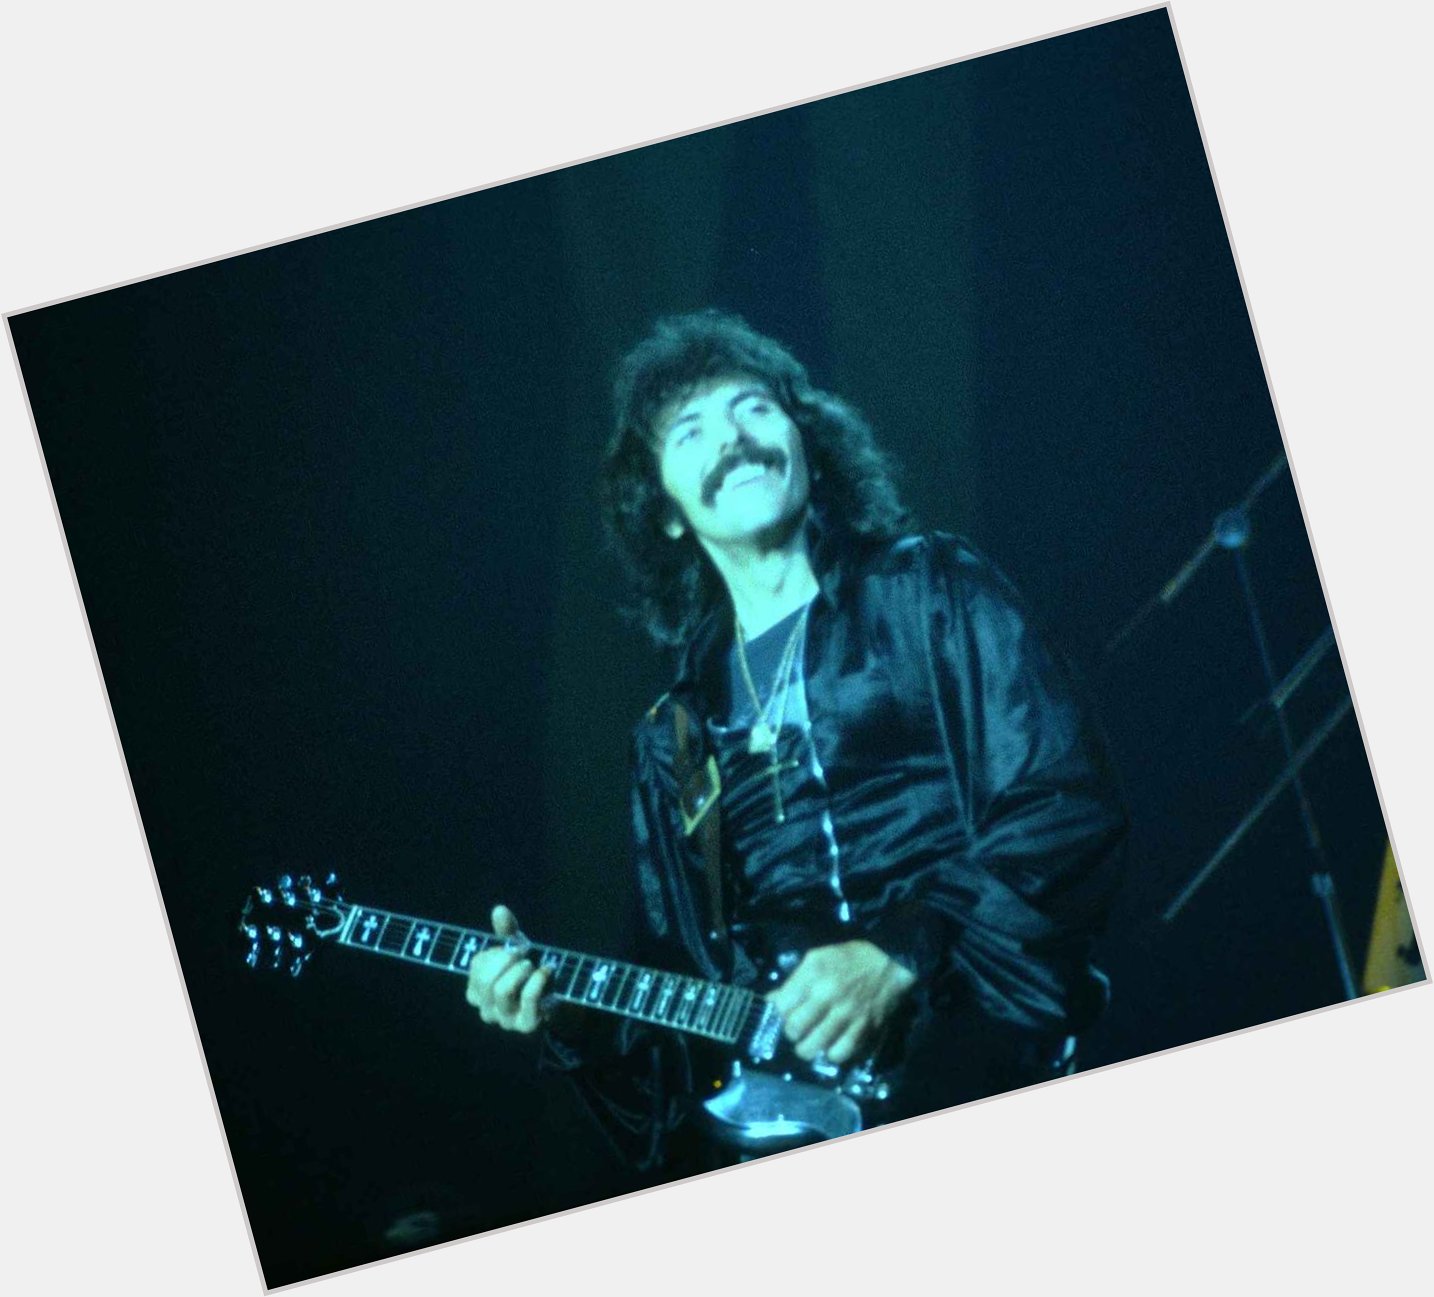 Happy 75th (!!!) birthday to my all time favorite rock musician, the one, the only, Tony Iommi. 